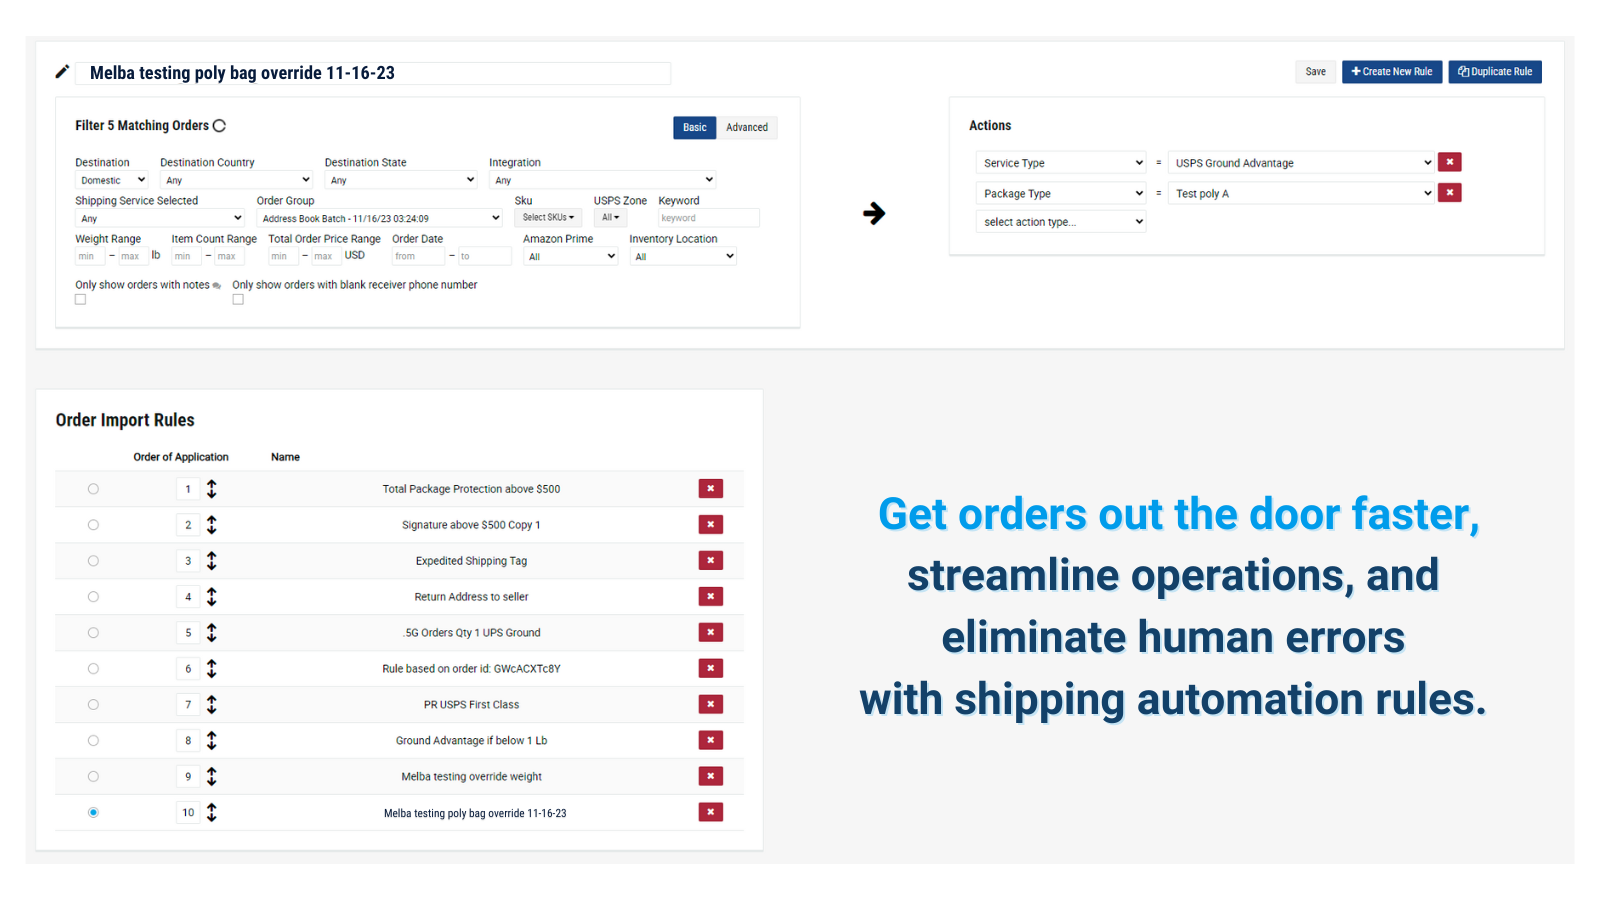 Shipping automation rules get orders out the door faster, streamline operations, and eliminate human errors